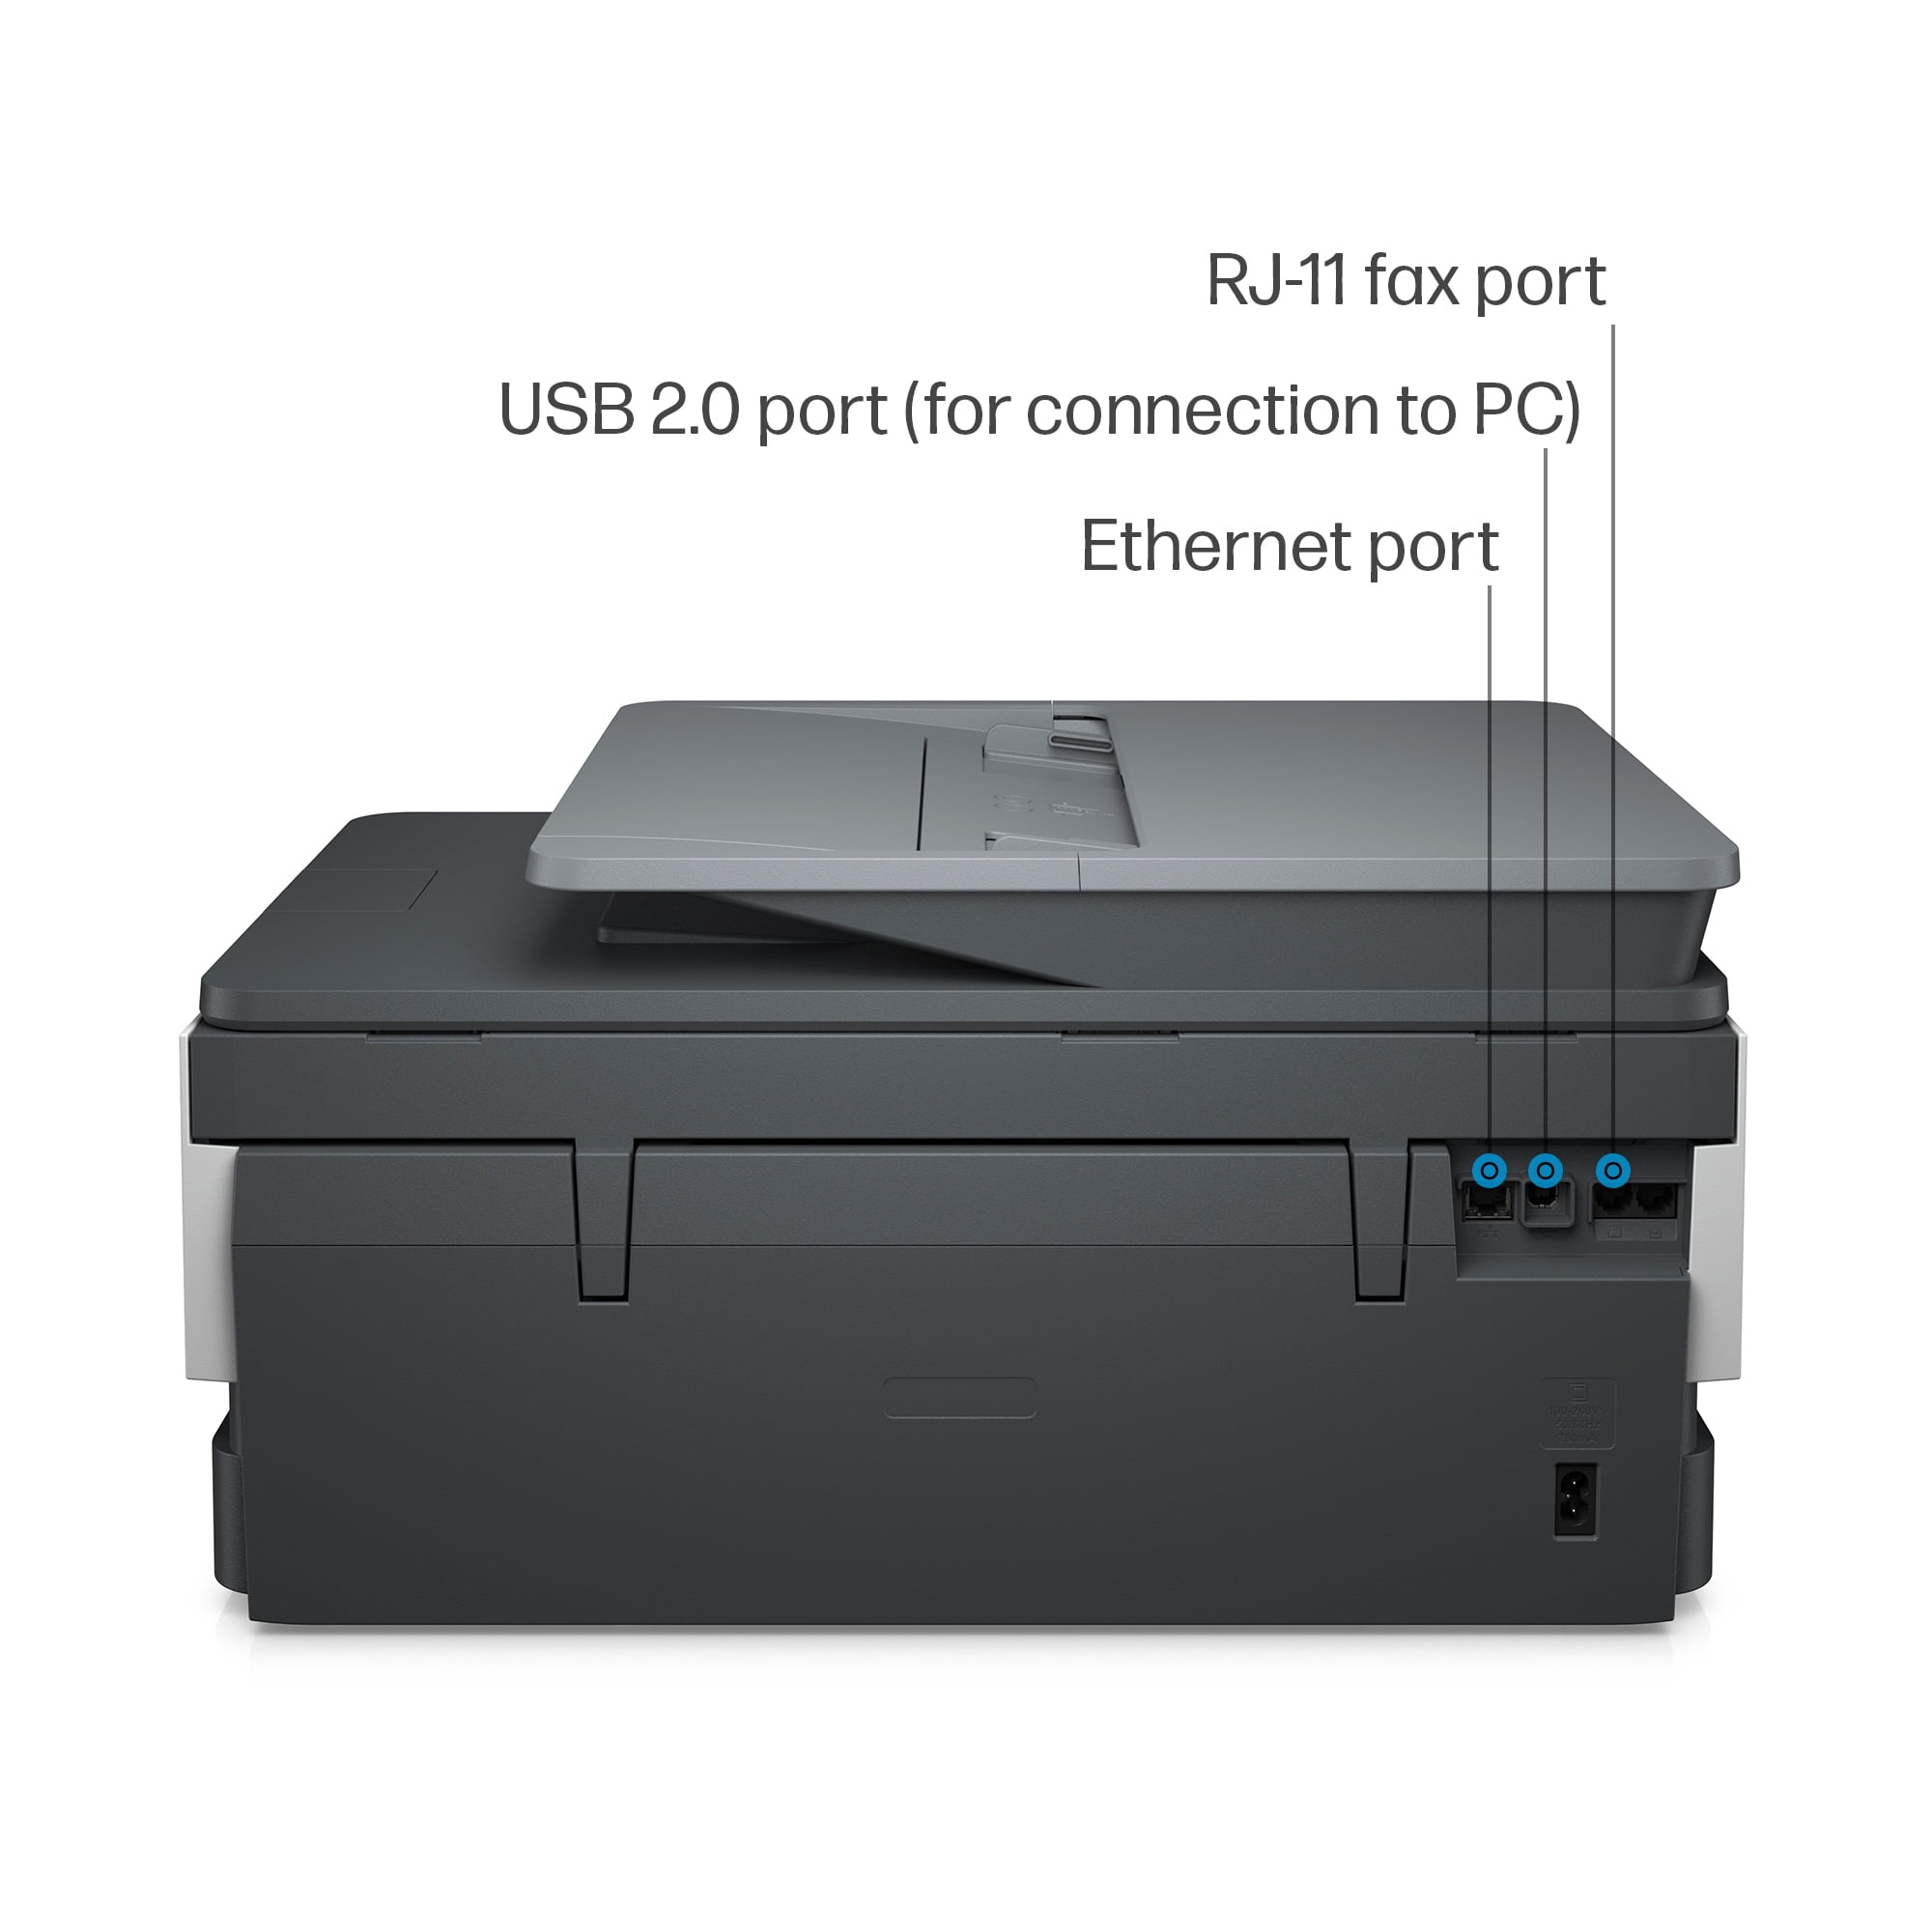 HP OfficeJet Pro 7720 review